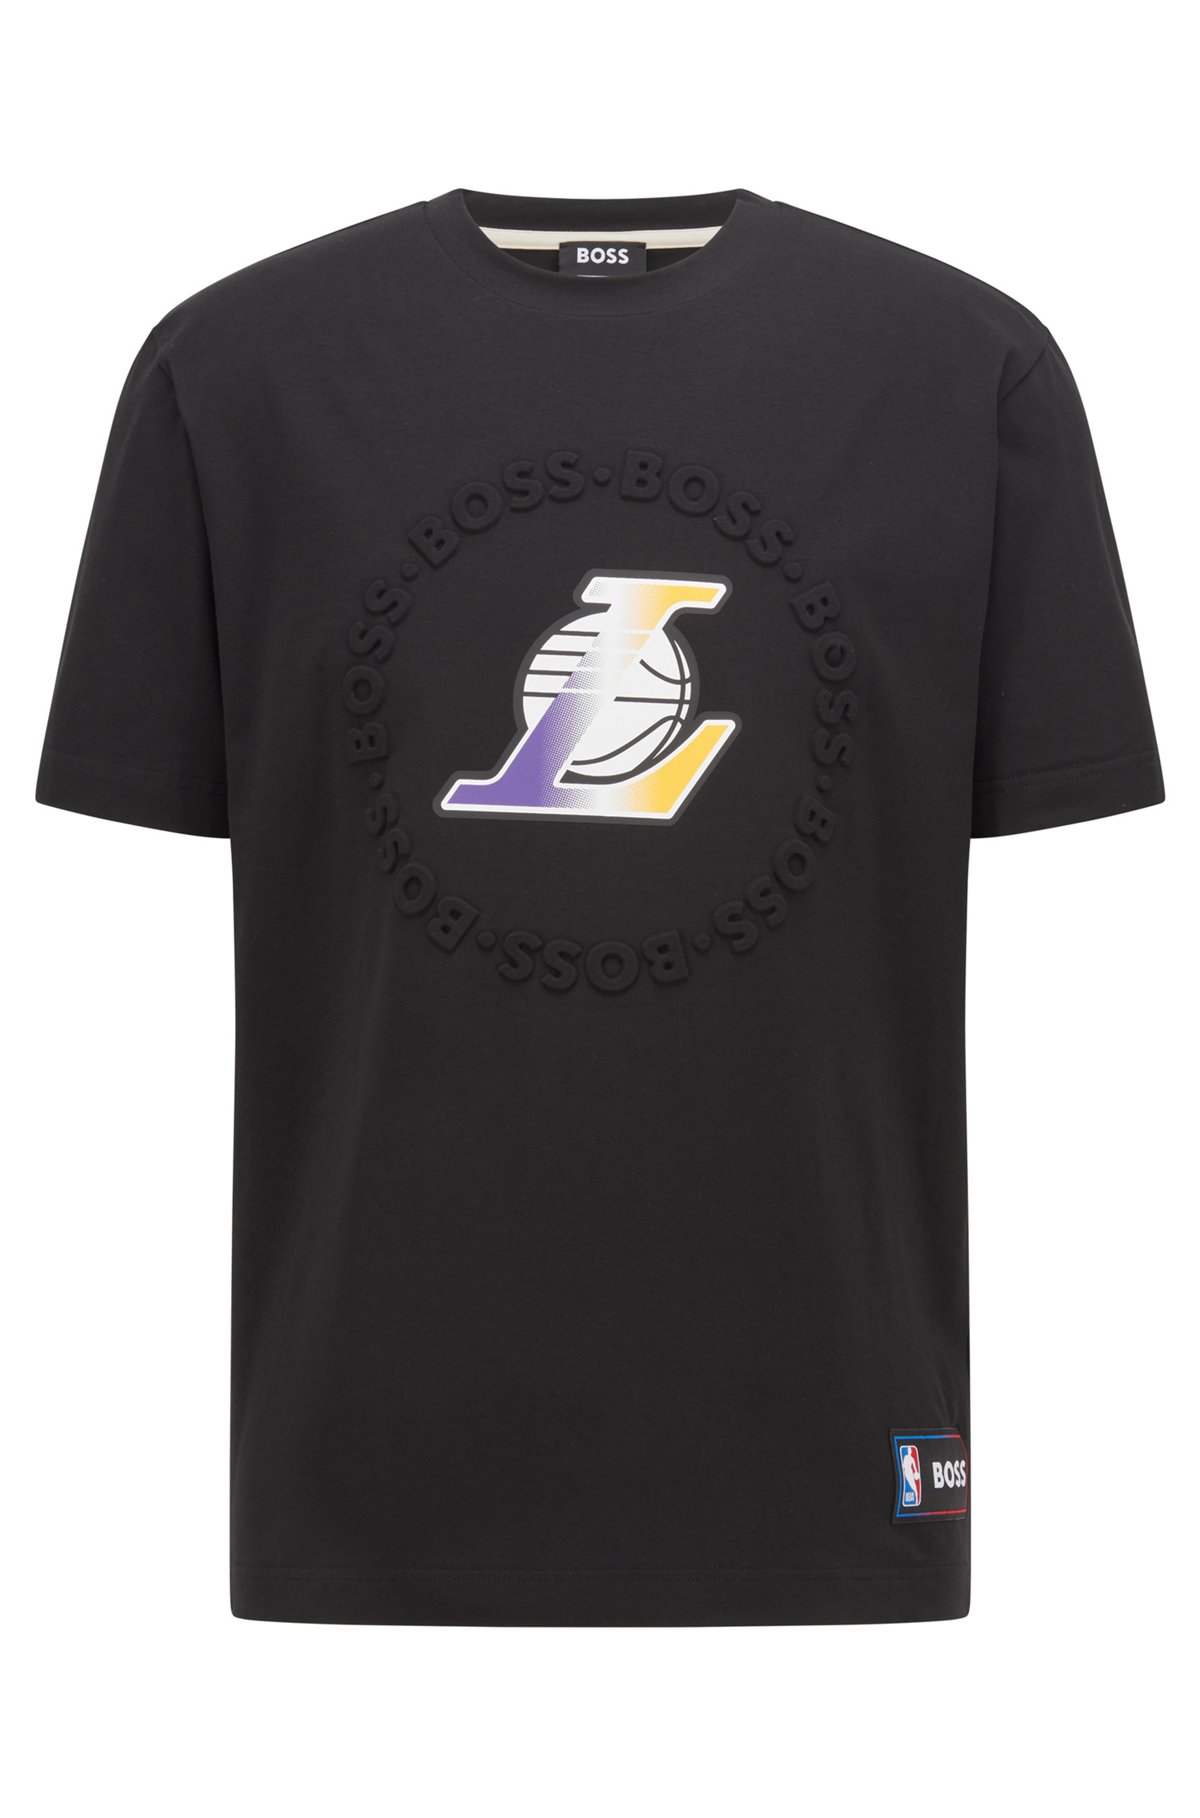 BOSS & NBA relaxed-fit T-shirt with dual branding, NBA Lakers